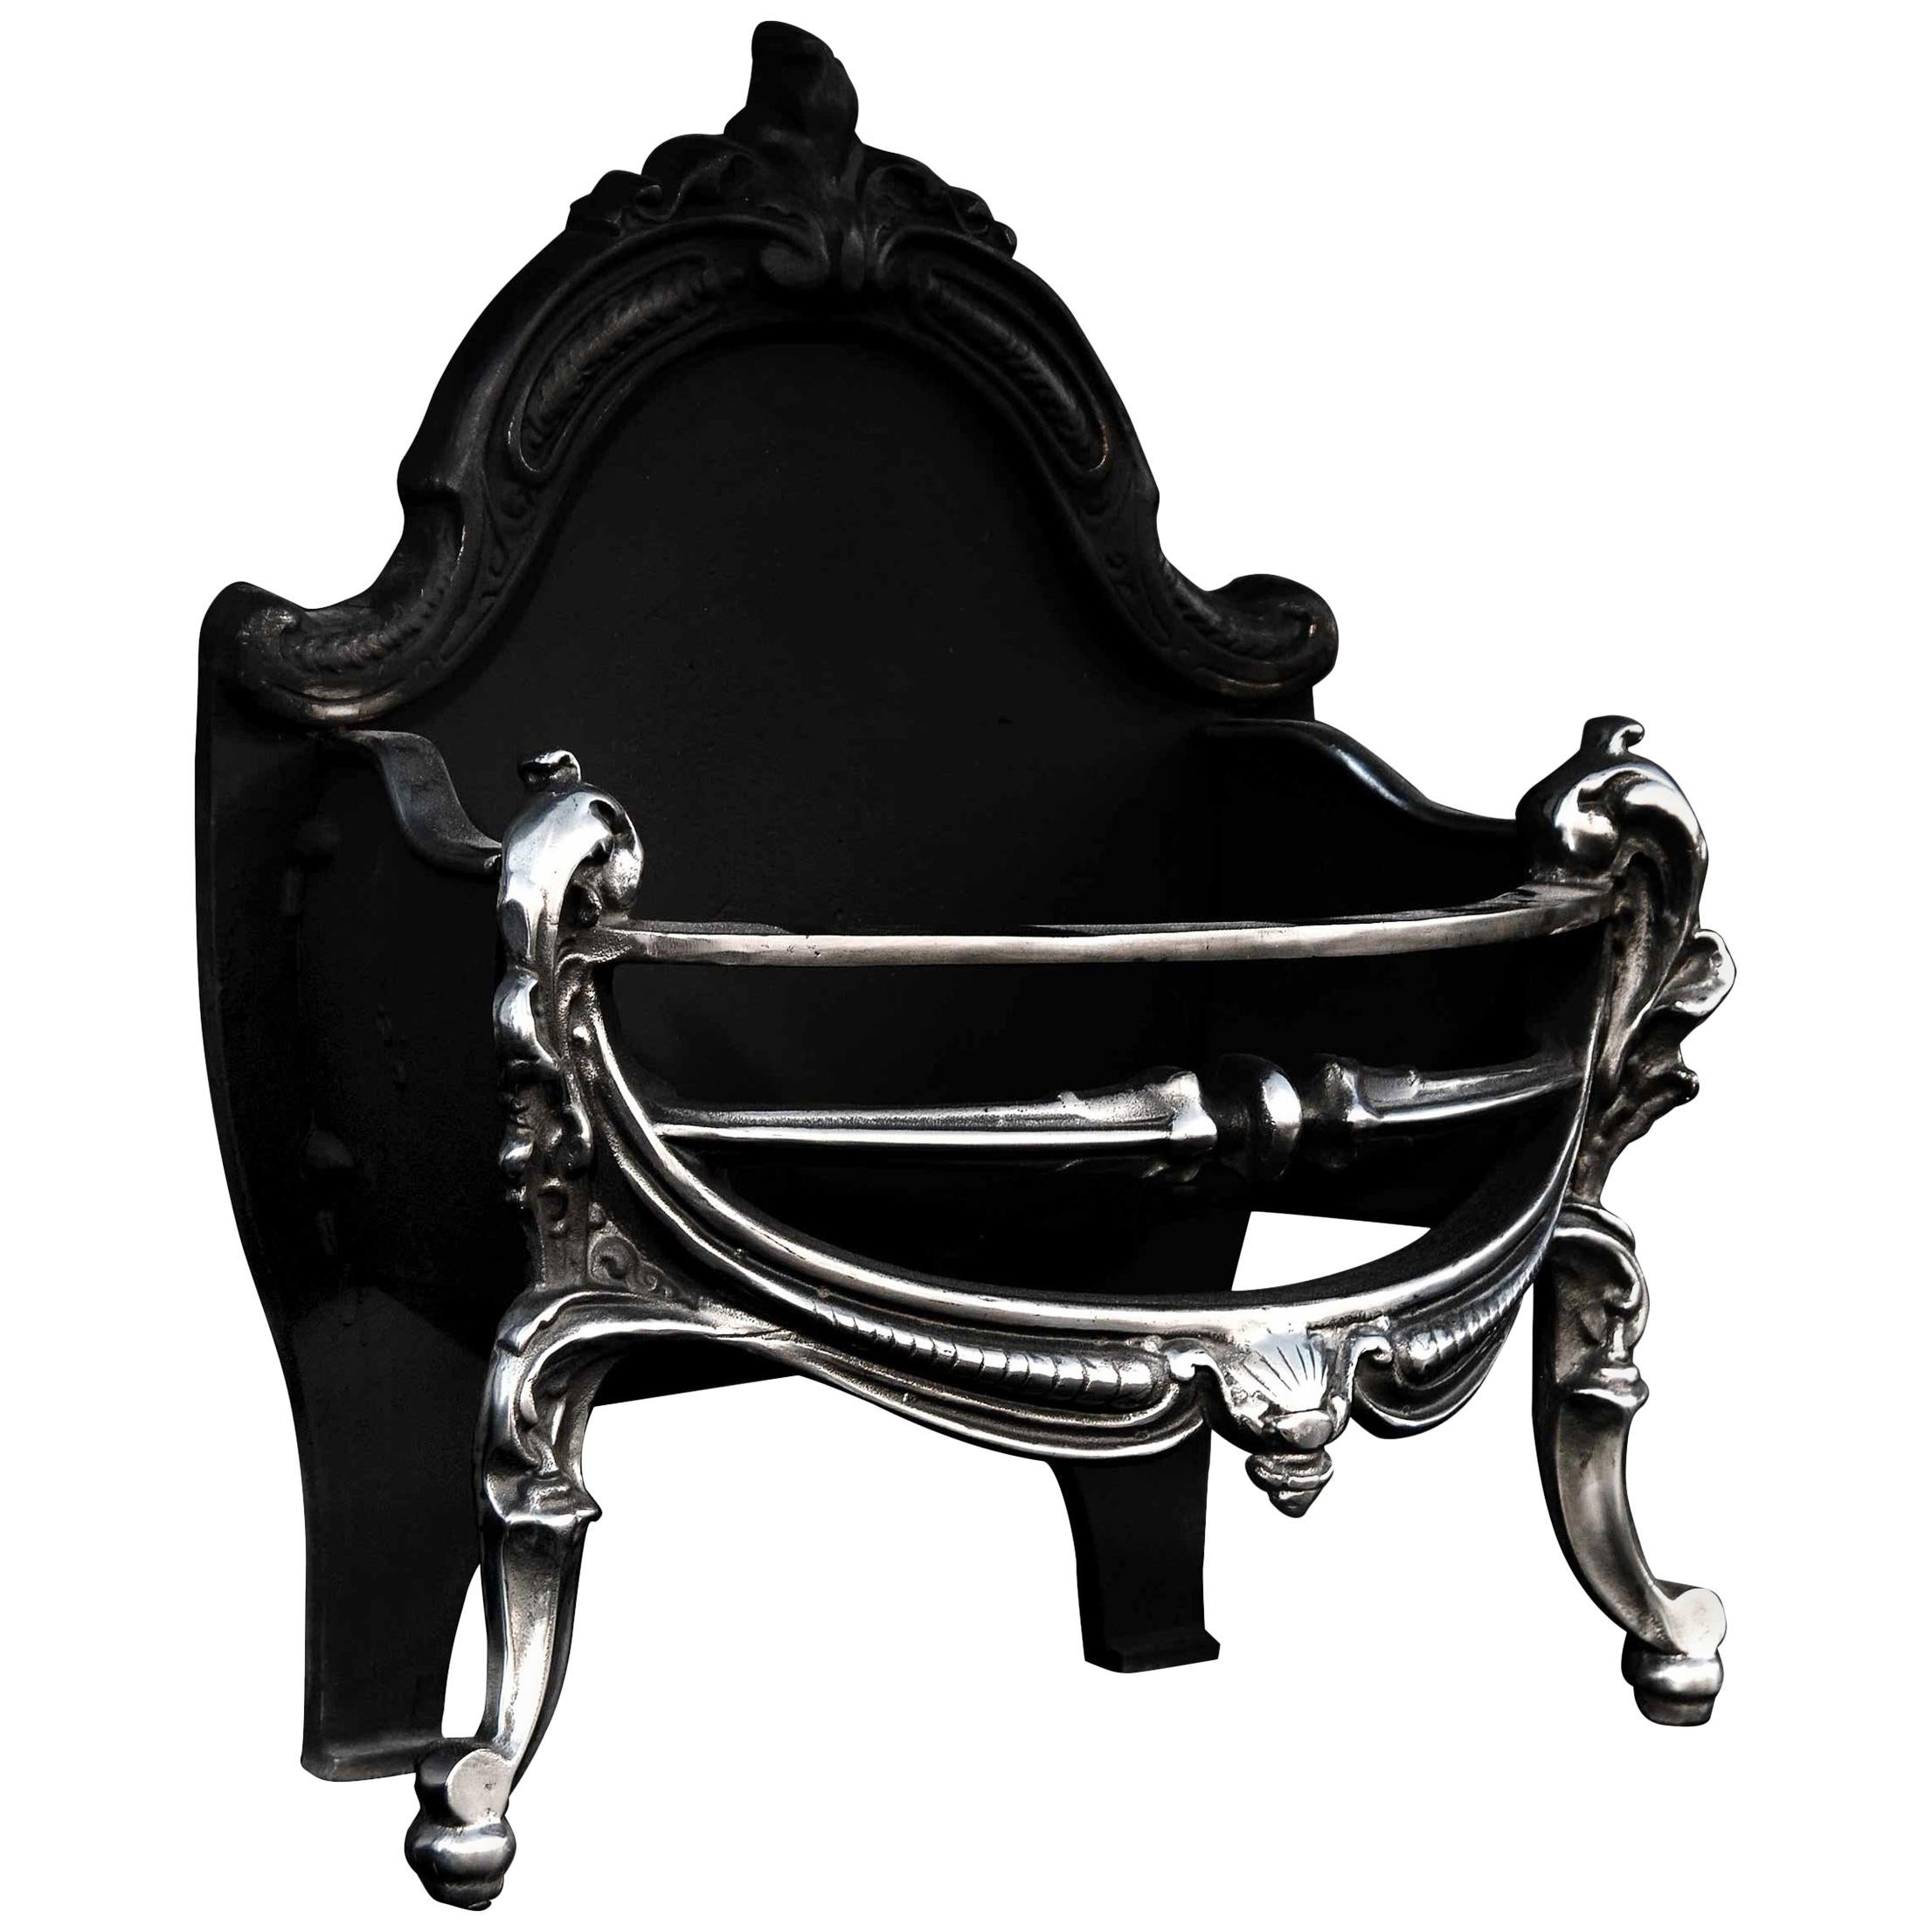 Polished Cast Iron Firebasket in the Rococo Manner